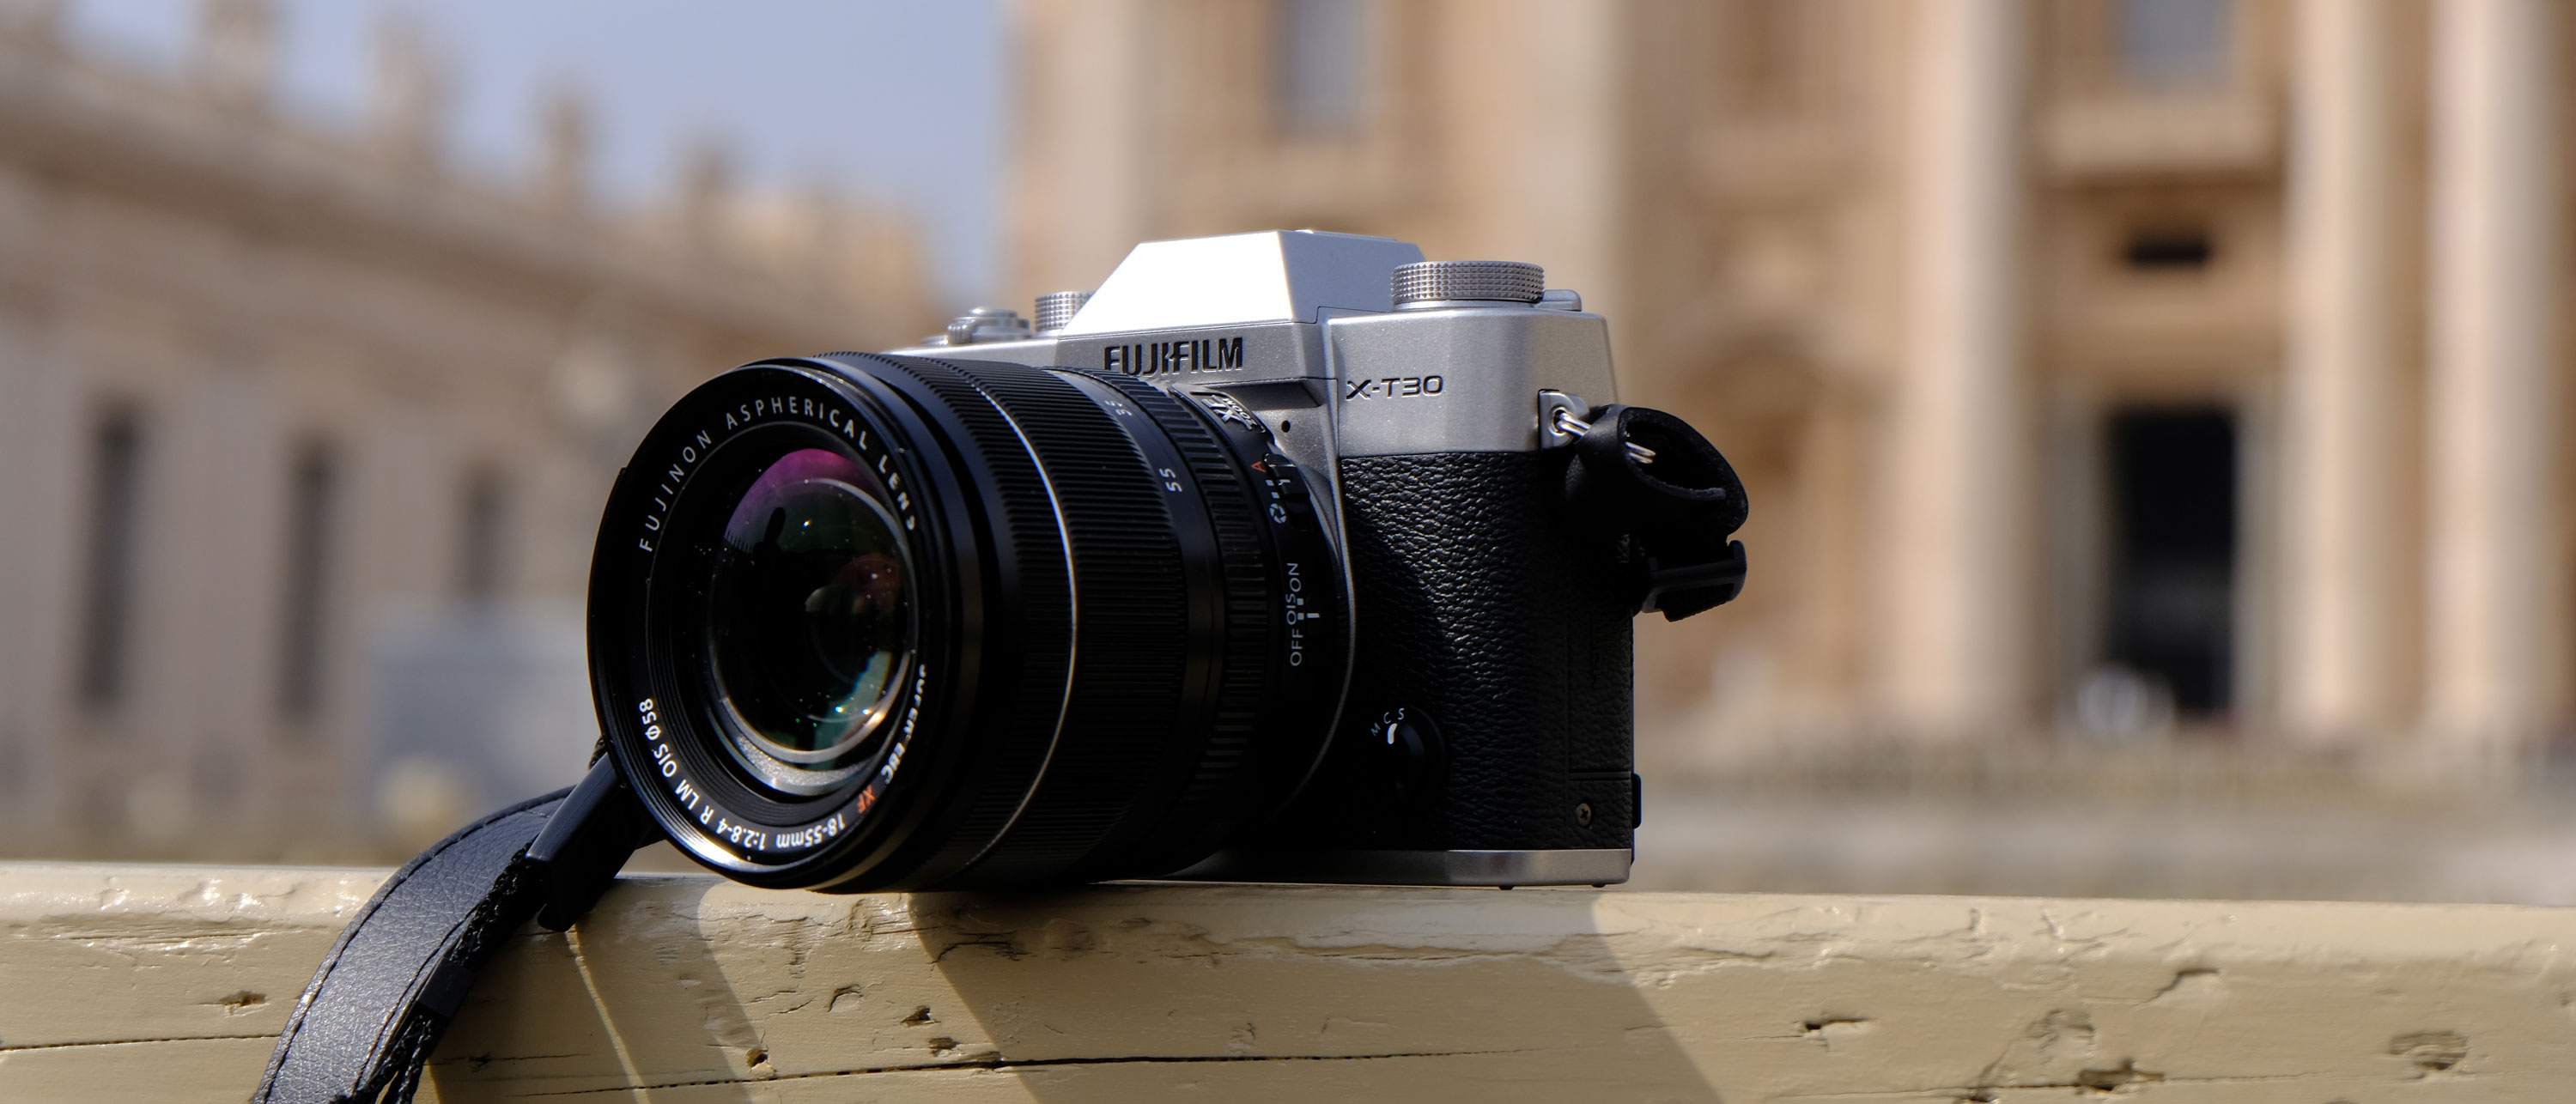 Fujifilm X-T30 review: Great for video, not perfect - Videomaker